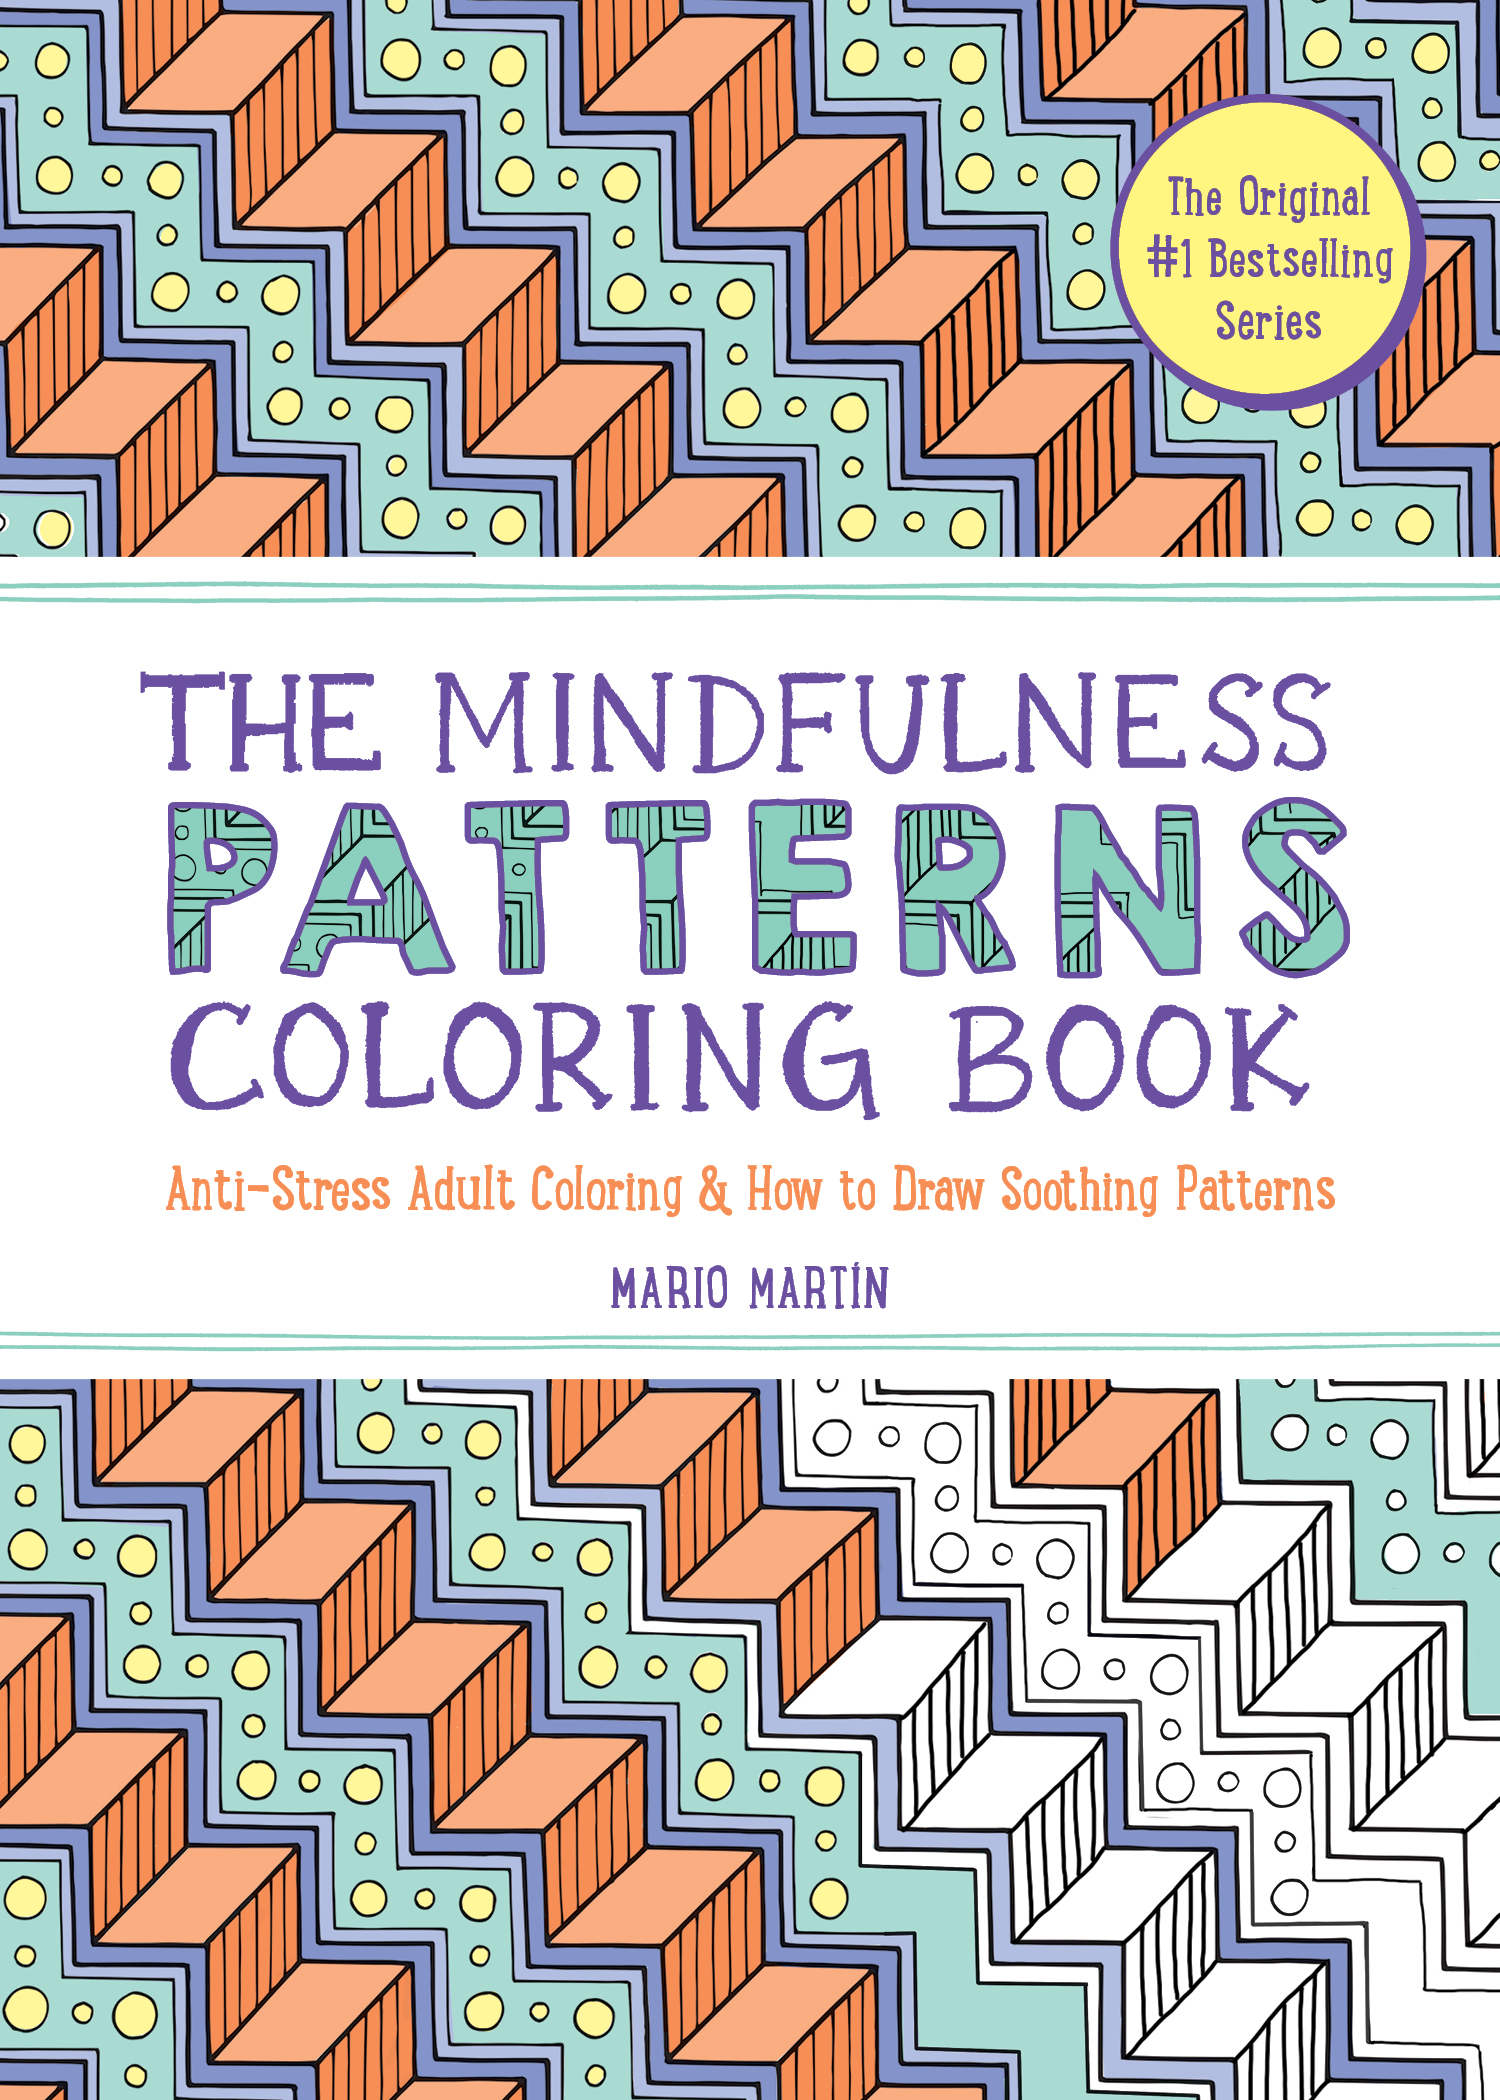 Mindfulness Coloring Book Printable Pages, Draw Stress Relieving Designs